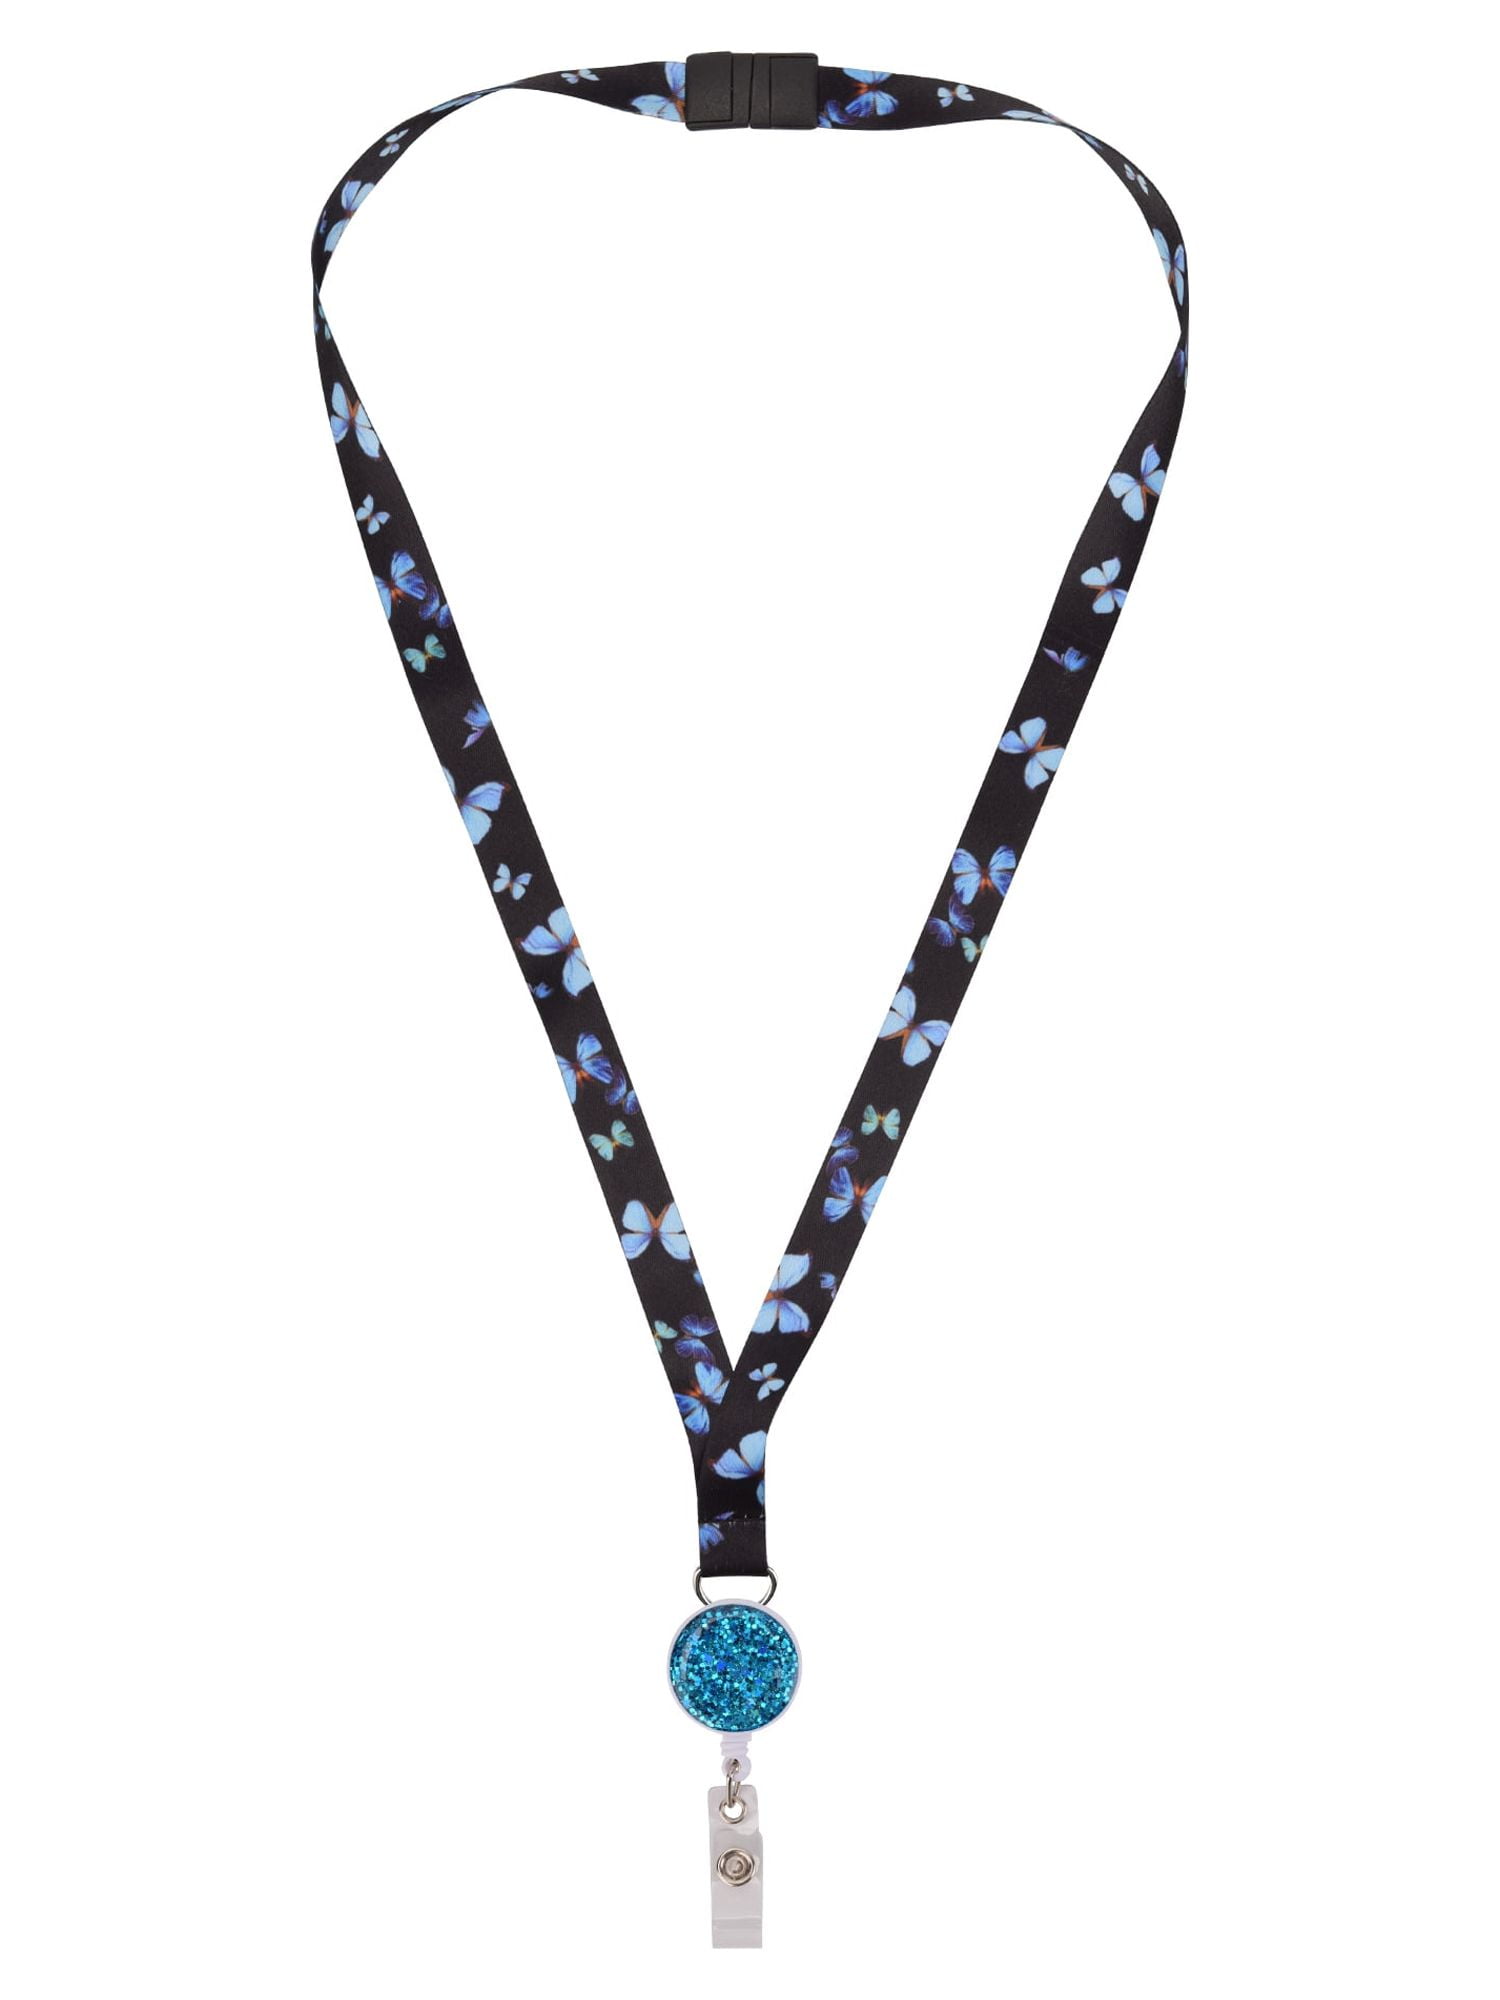 Solutions adult Female Butterfly Print Lanyard with Blue Glitter Badge Reel